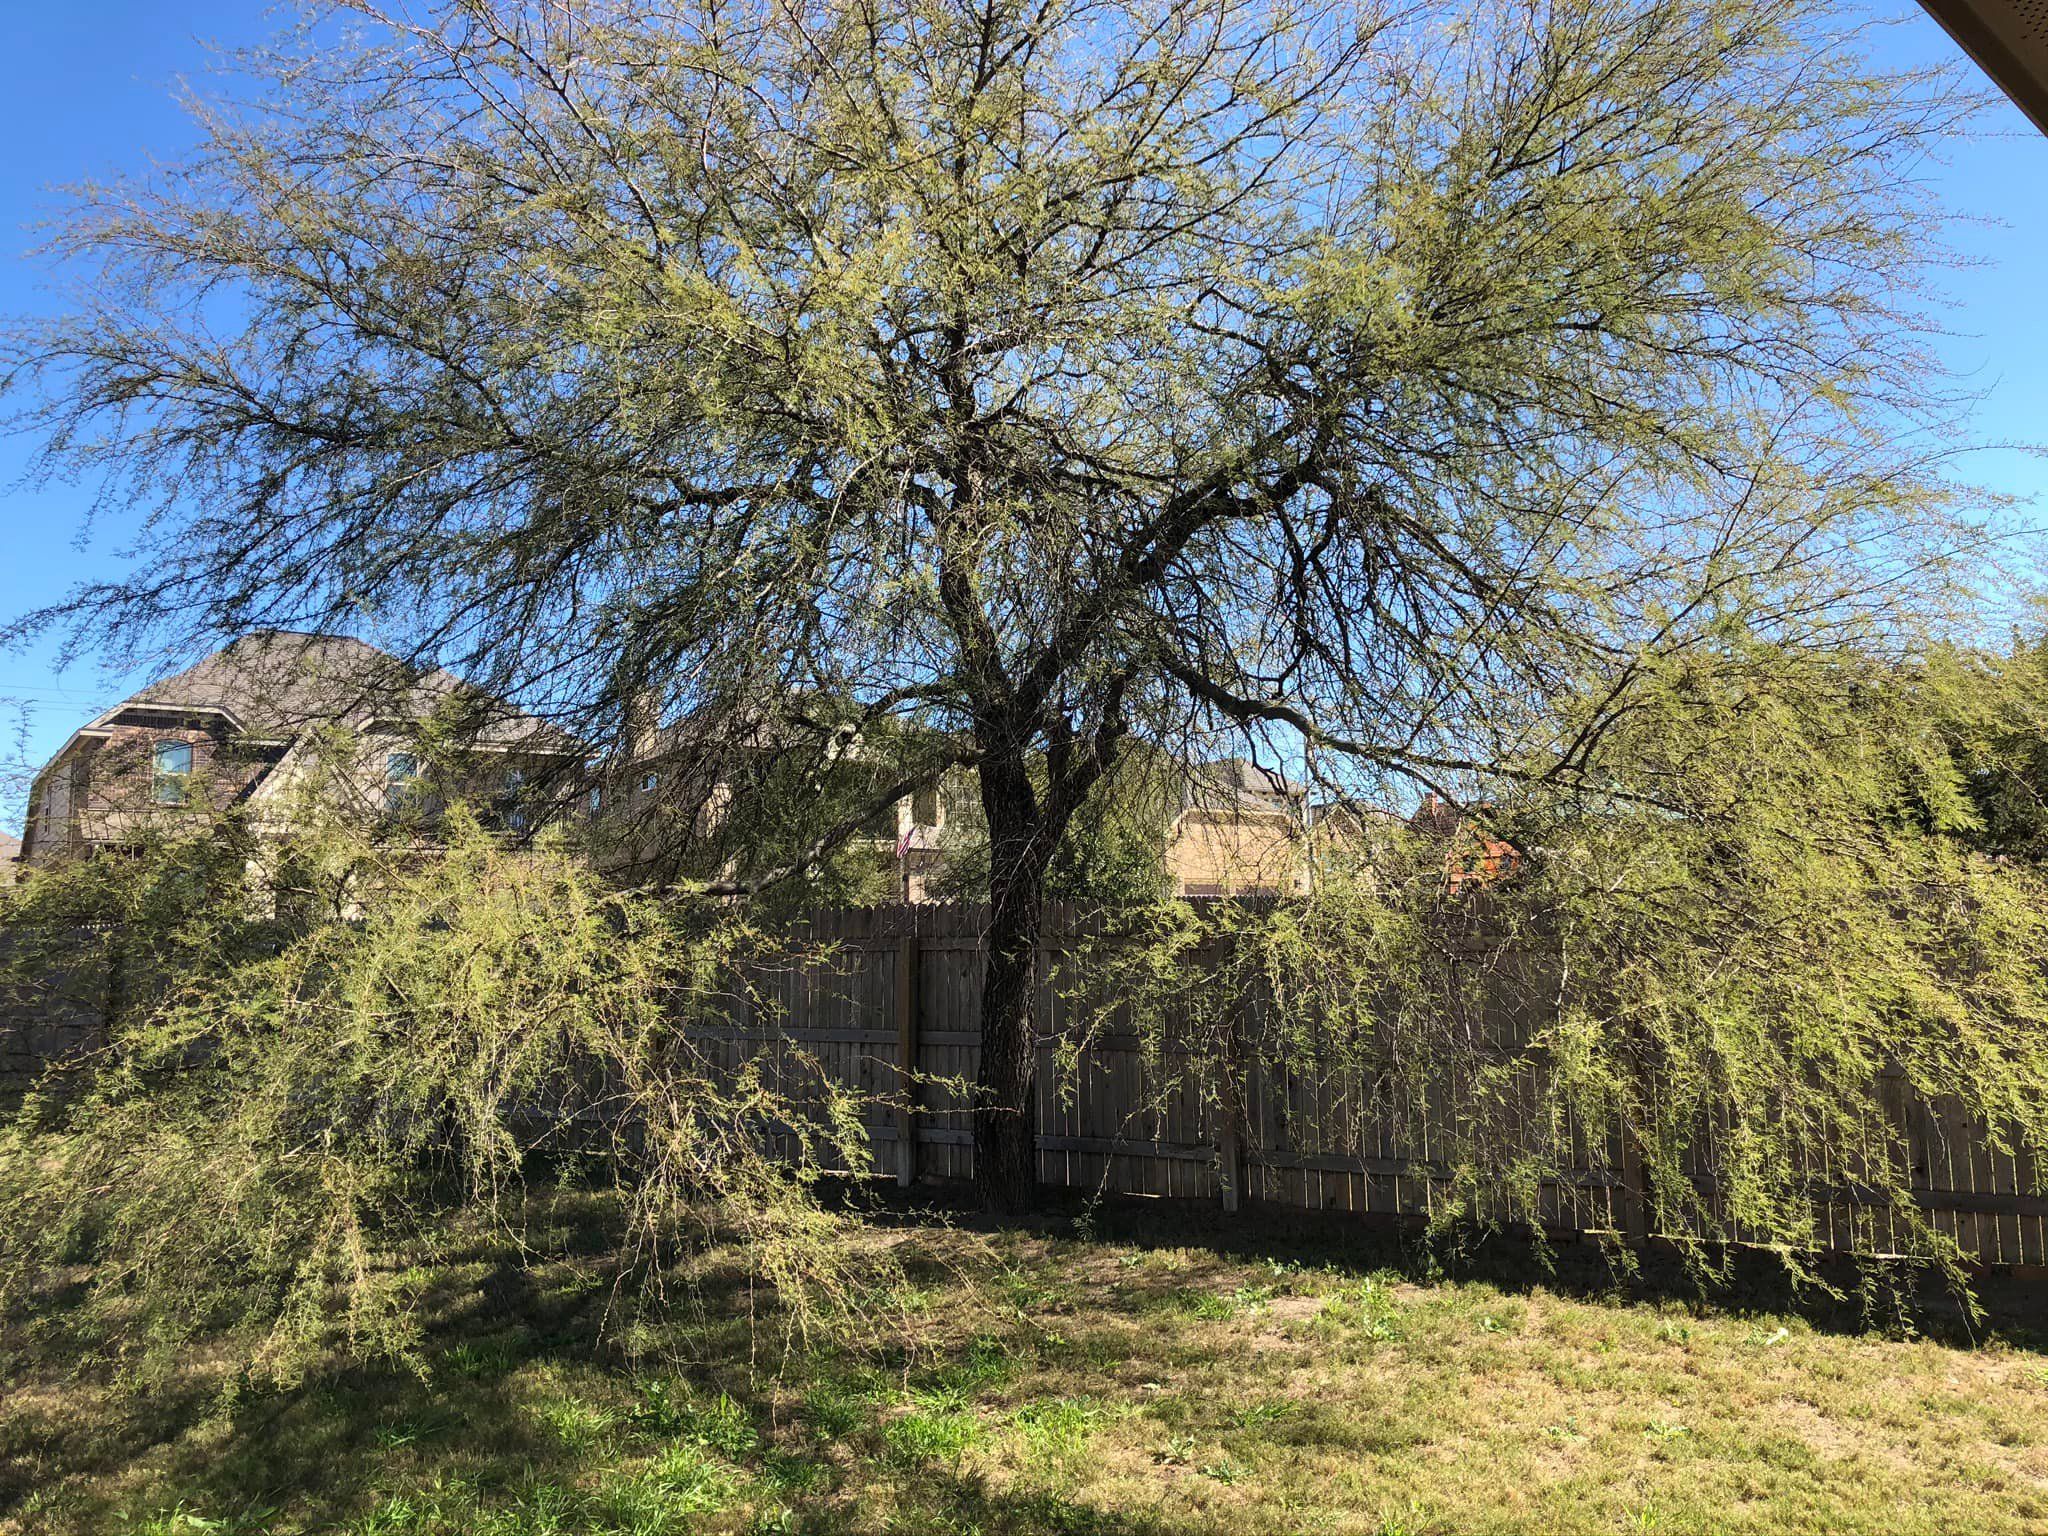  for Neighborhood Lawn Care and Tree Service  in San Antonio, TX